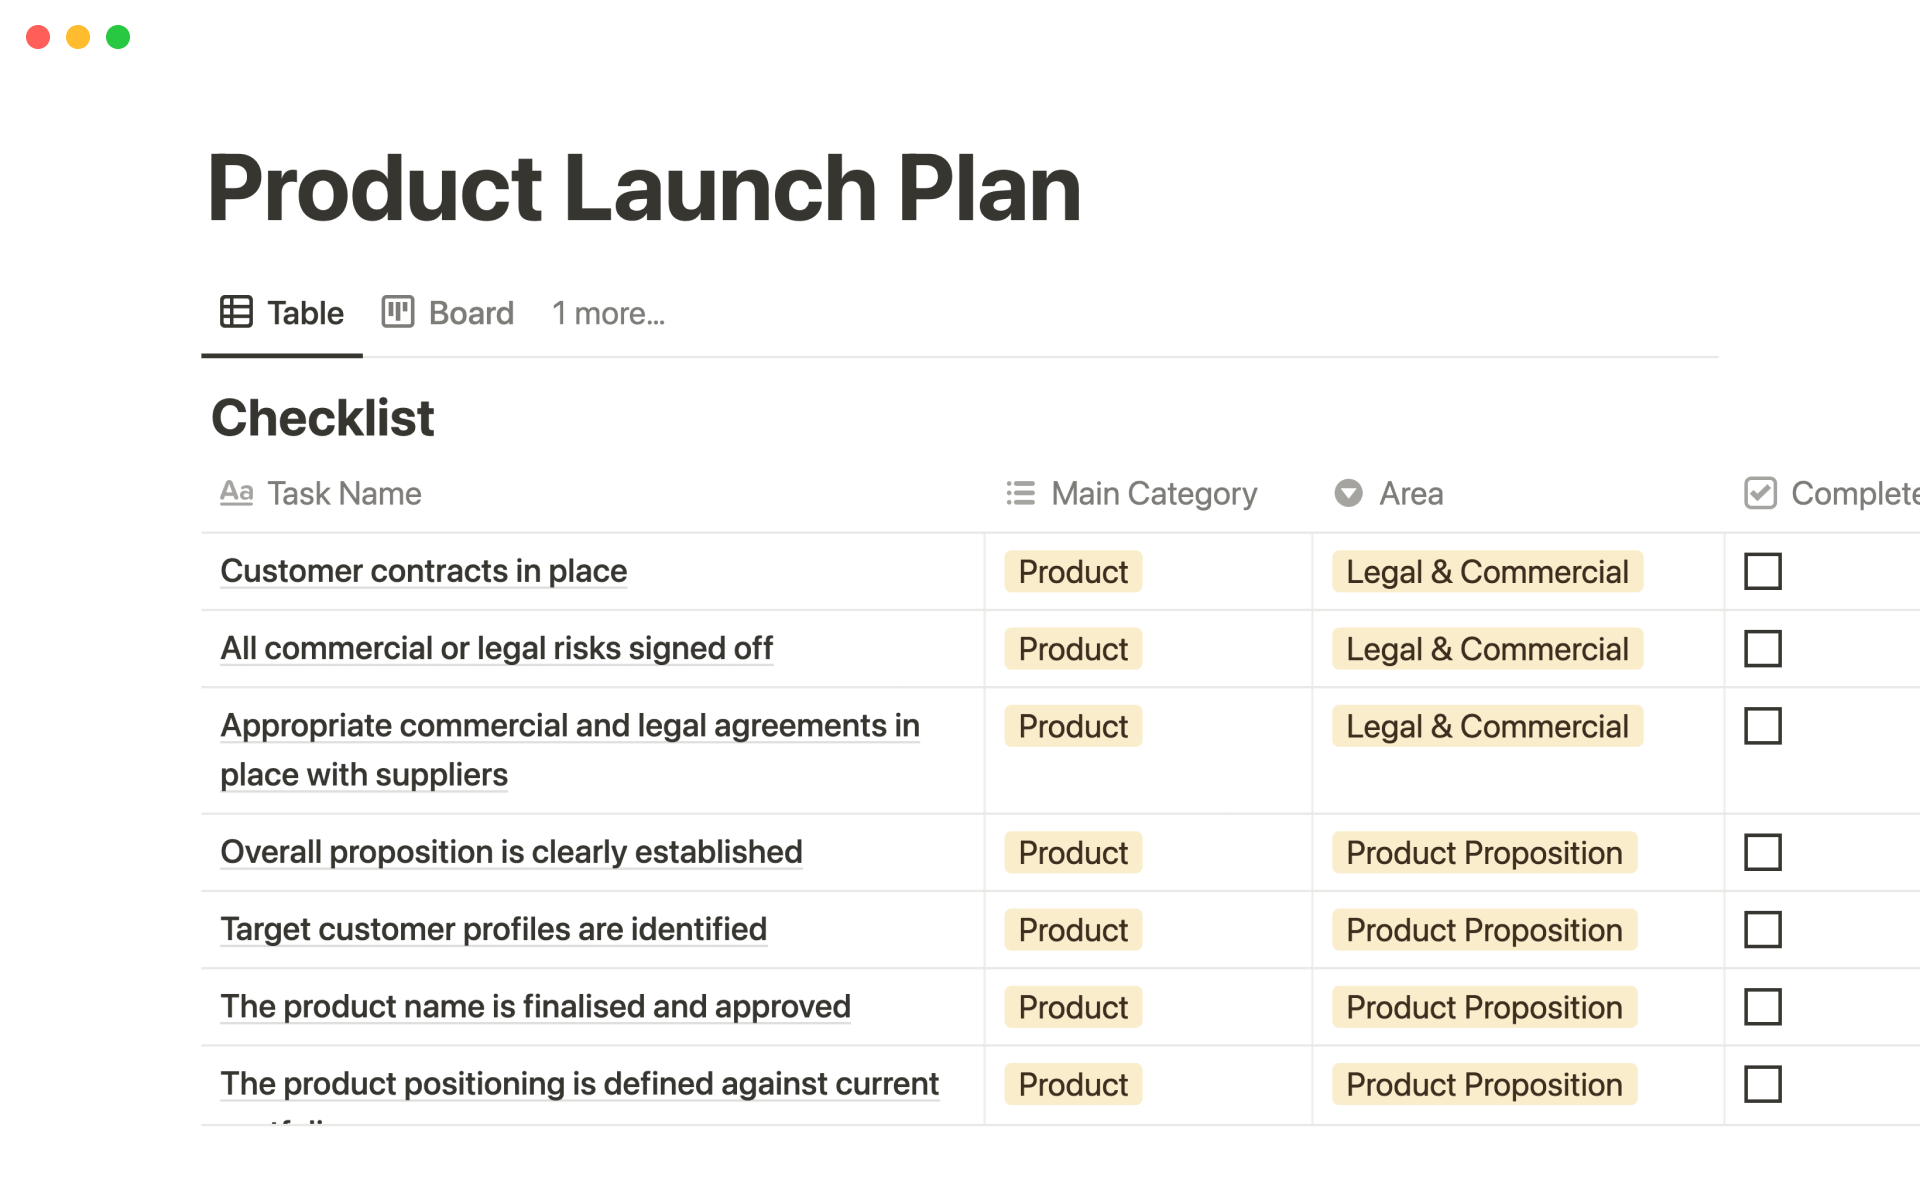 Plan your product launch and ensure all the launch tasks get completed.